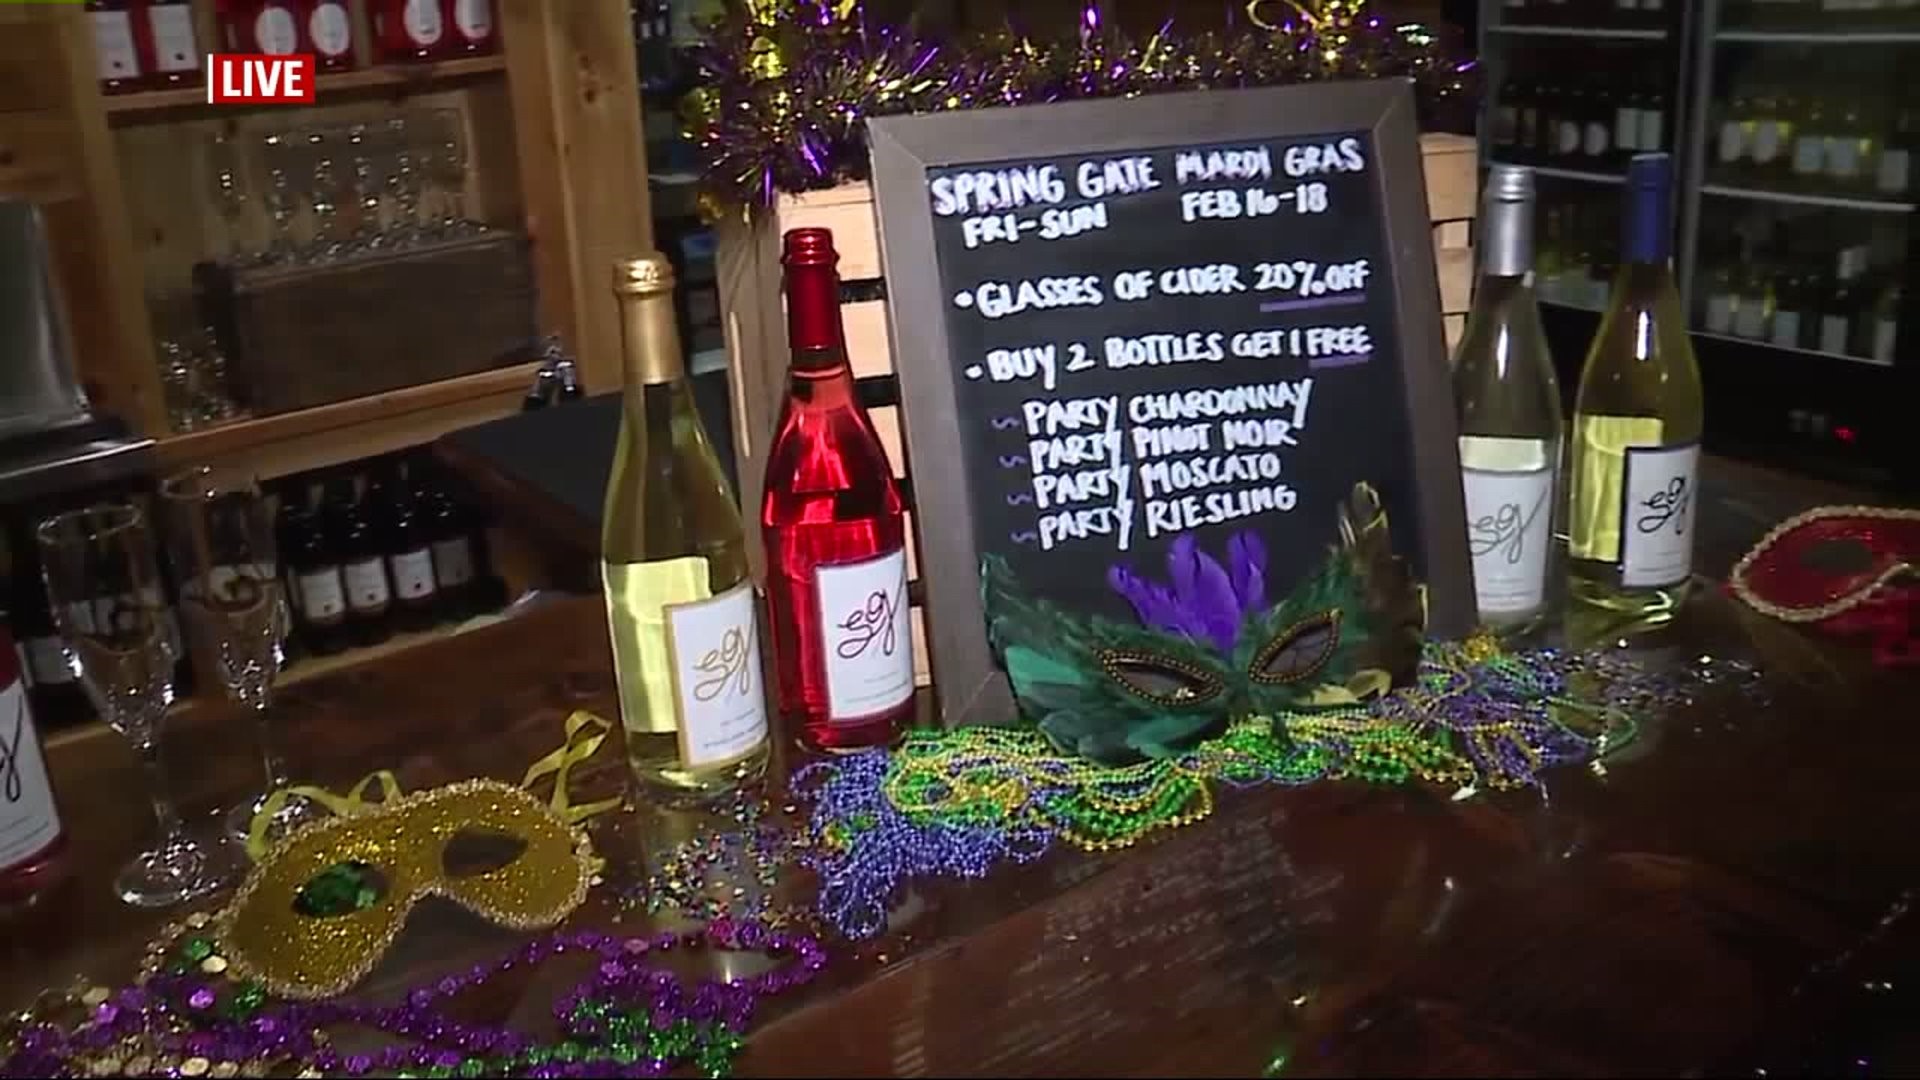 Celebrate Mardi Gras at Spring Gate Vineyard and Brewery in Dauphin County